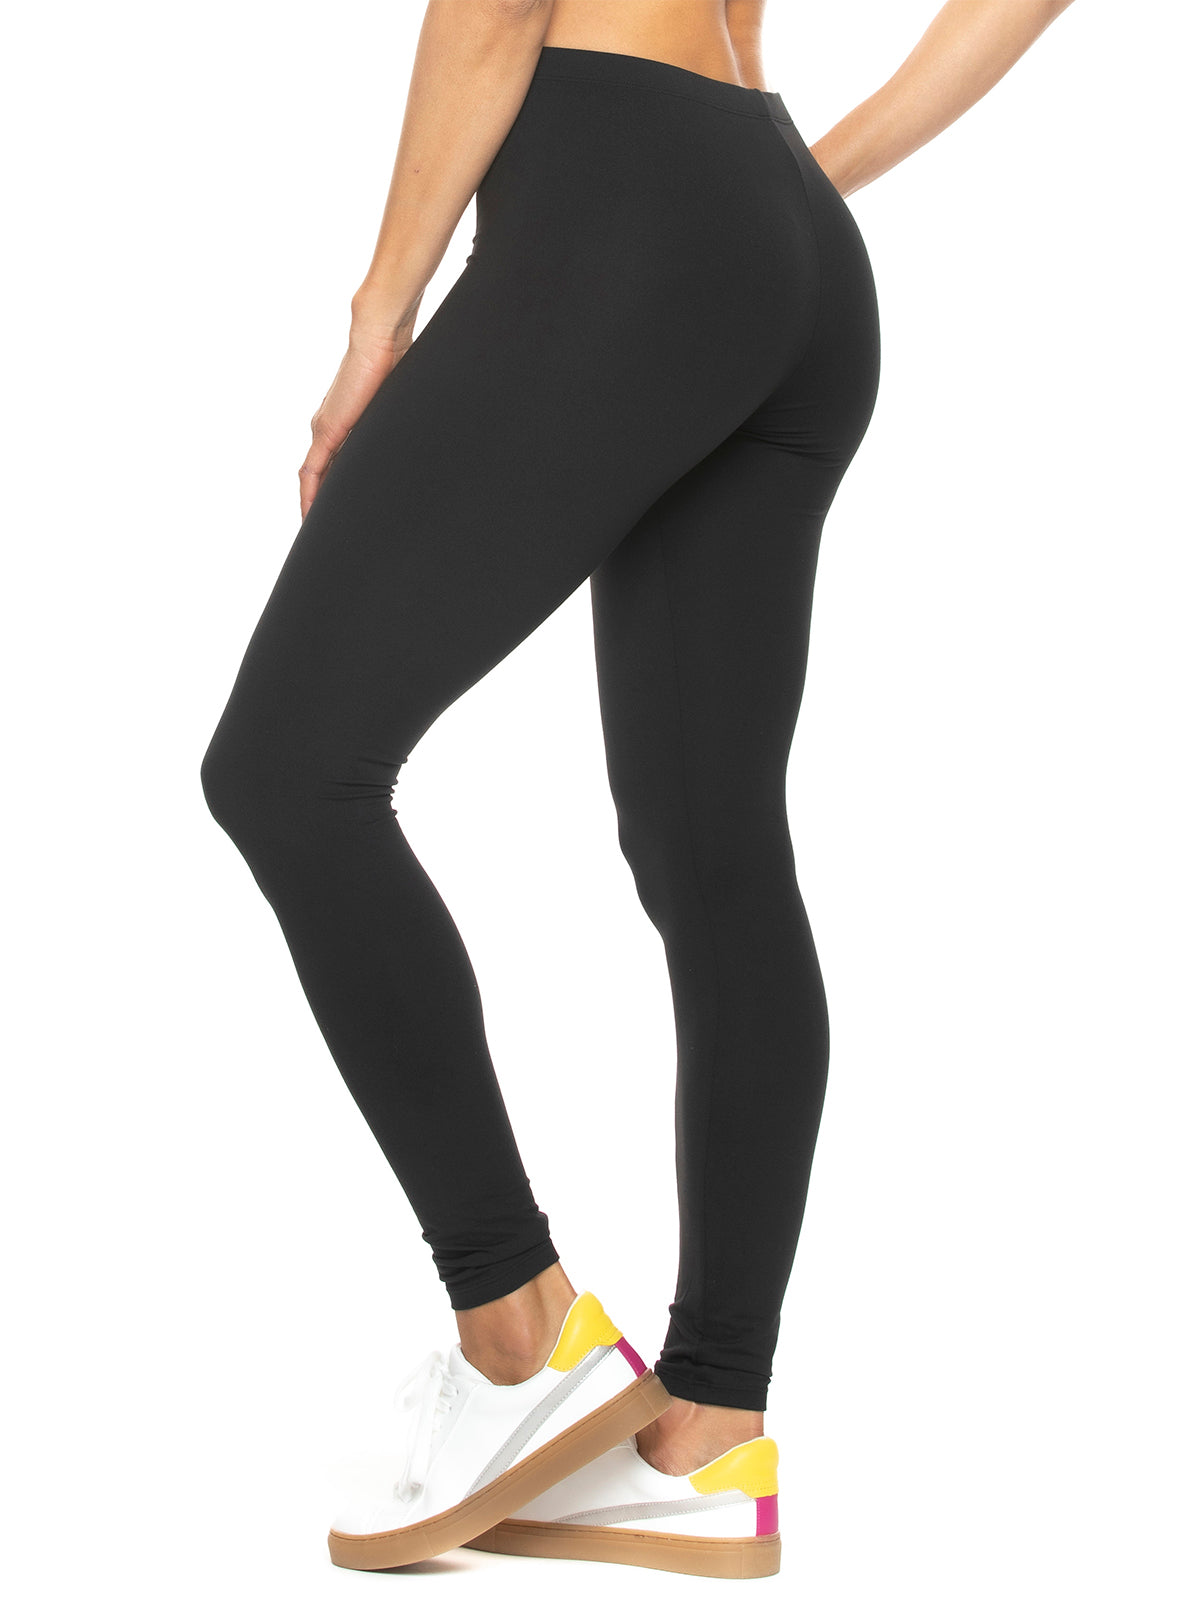 Felina Sueded Athleisure Performance Legging (2-Pack) Womens Leggings  w/Slimming Waist Band Style: C3690RT (Raven Leopard Black, X-Small)